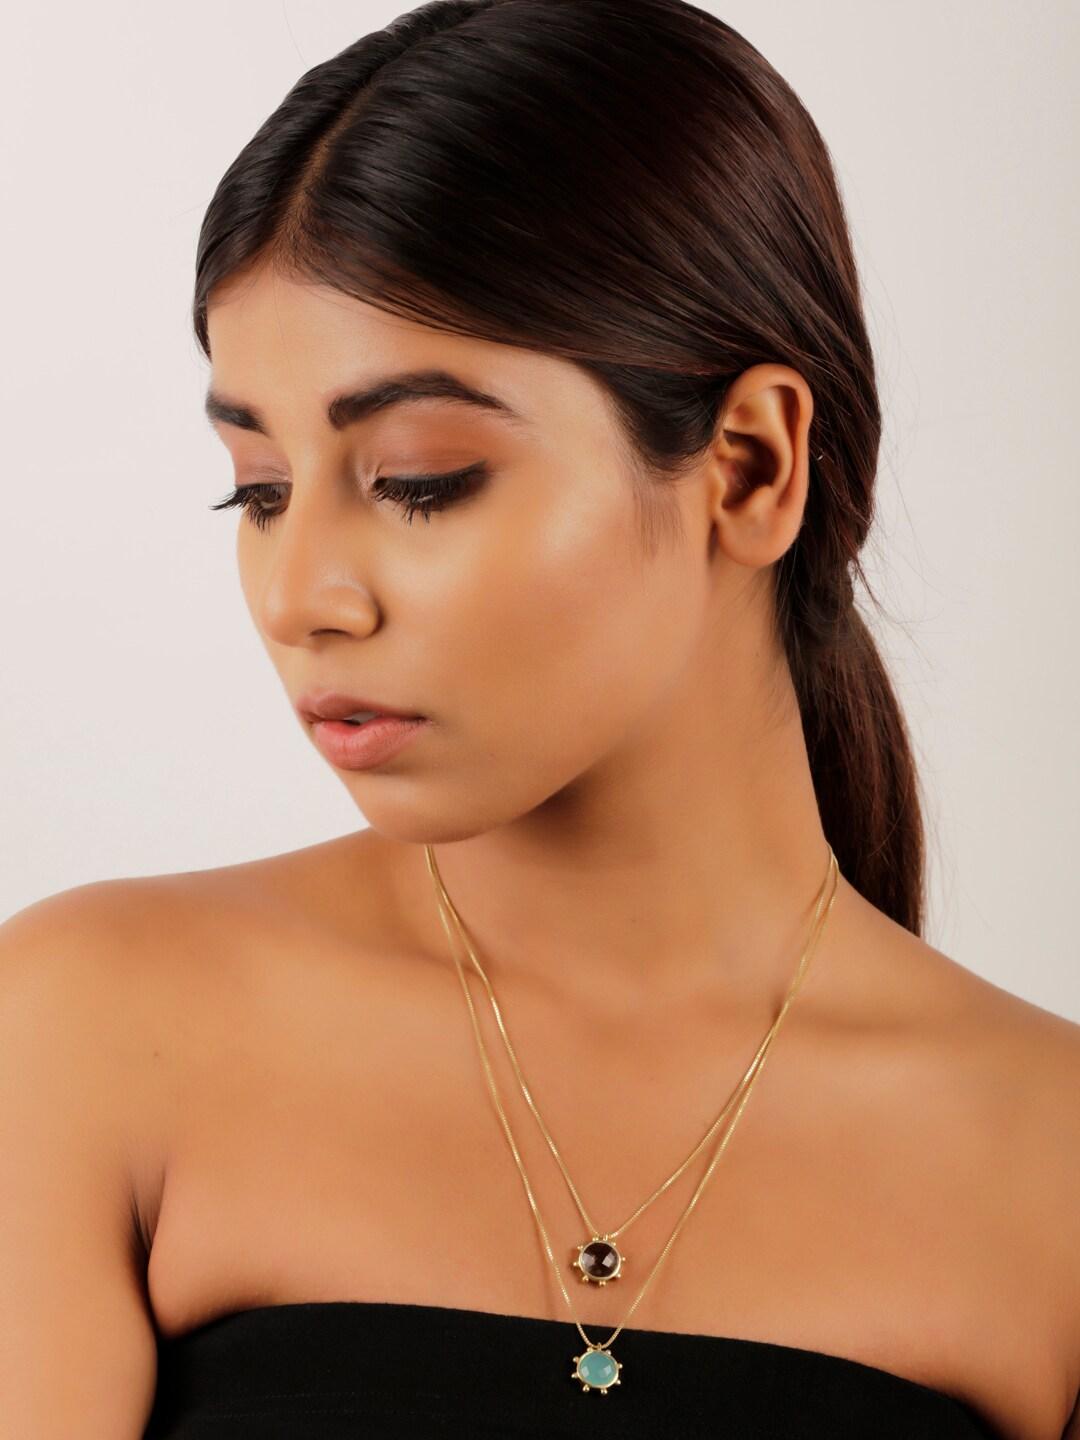 stilskii unisex gold-toned chain marvellous layered gold necklace